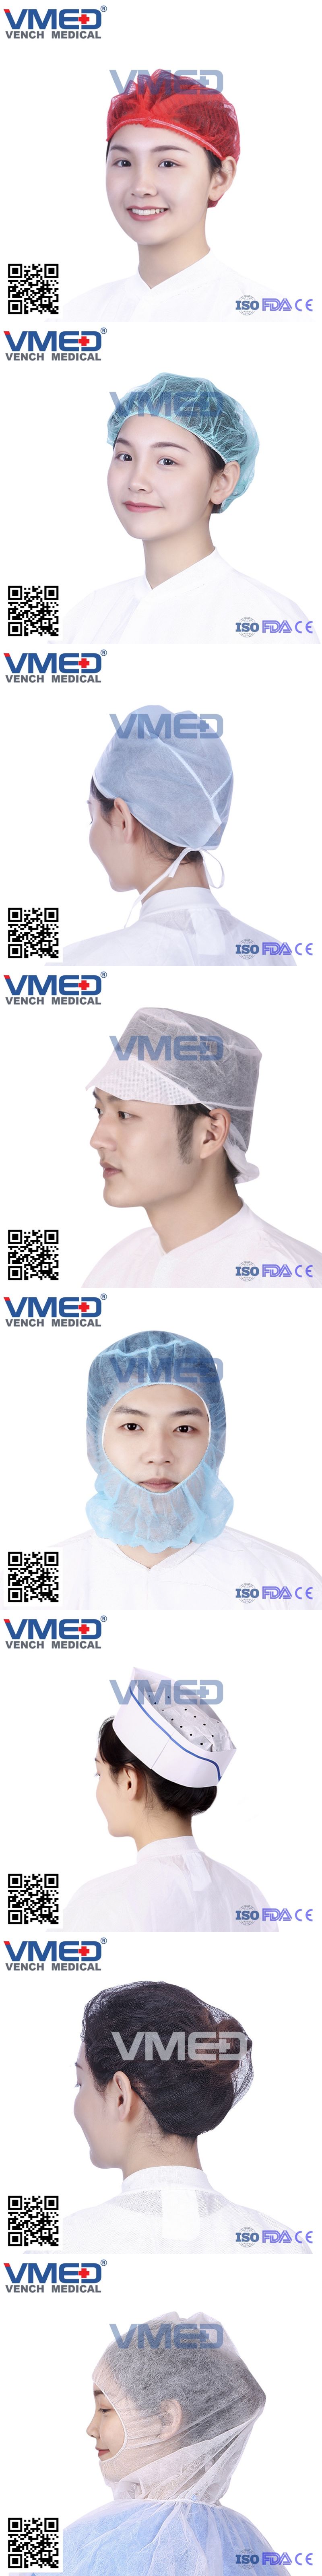 Disposable Non-Woven Surgical Cap with Easy Tie/Elastic Band, Doctor/Medical/ Bouffant/ Clip/ Mob Cap with Easy Tie, Non-Woven Cap with Easy Tie T